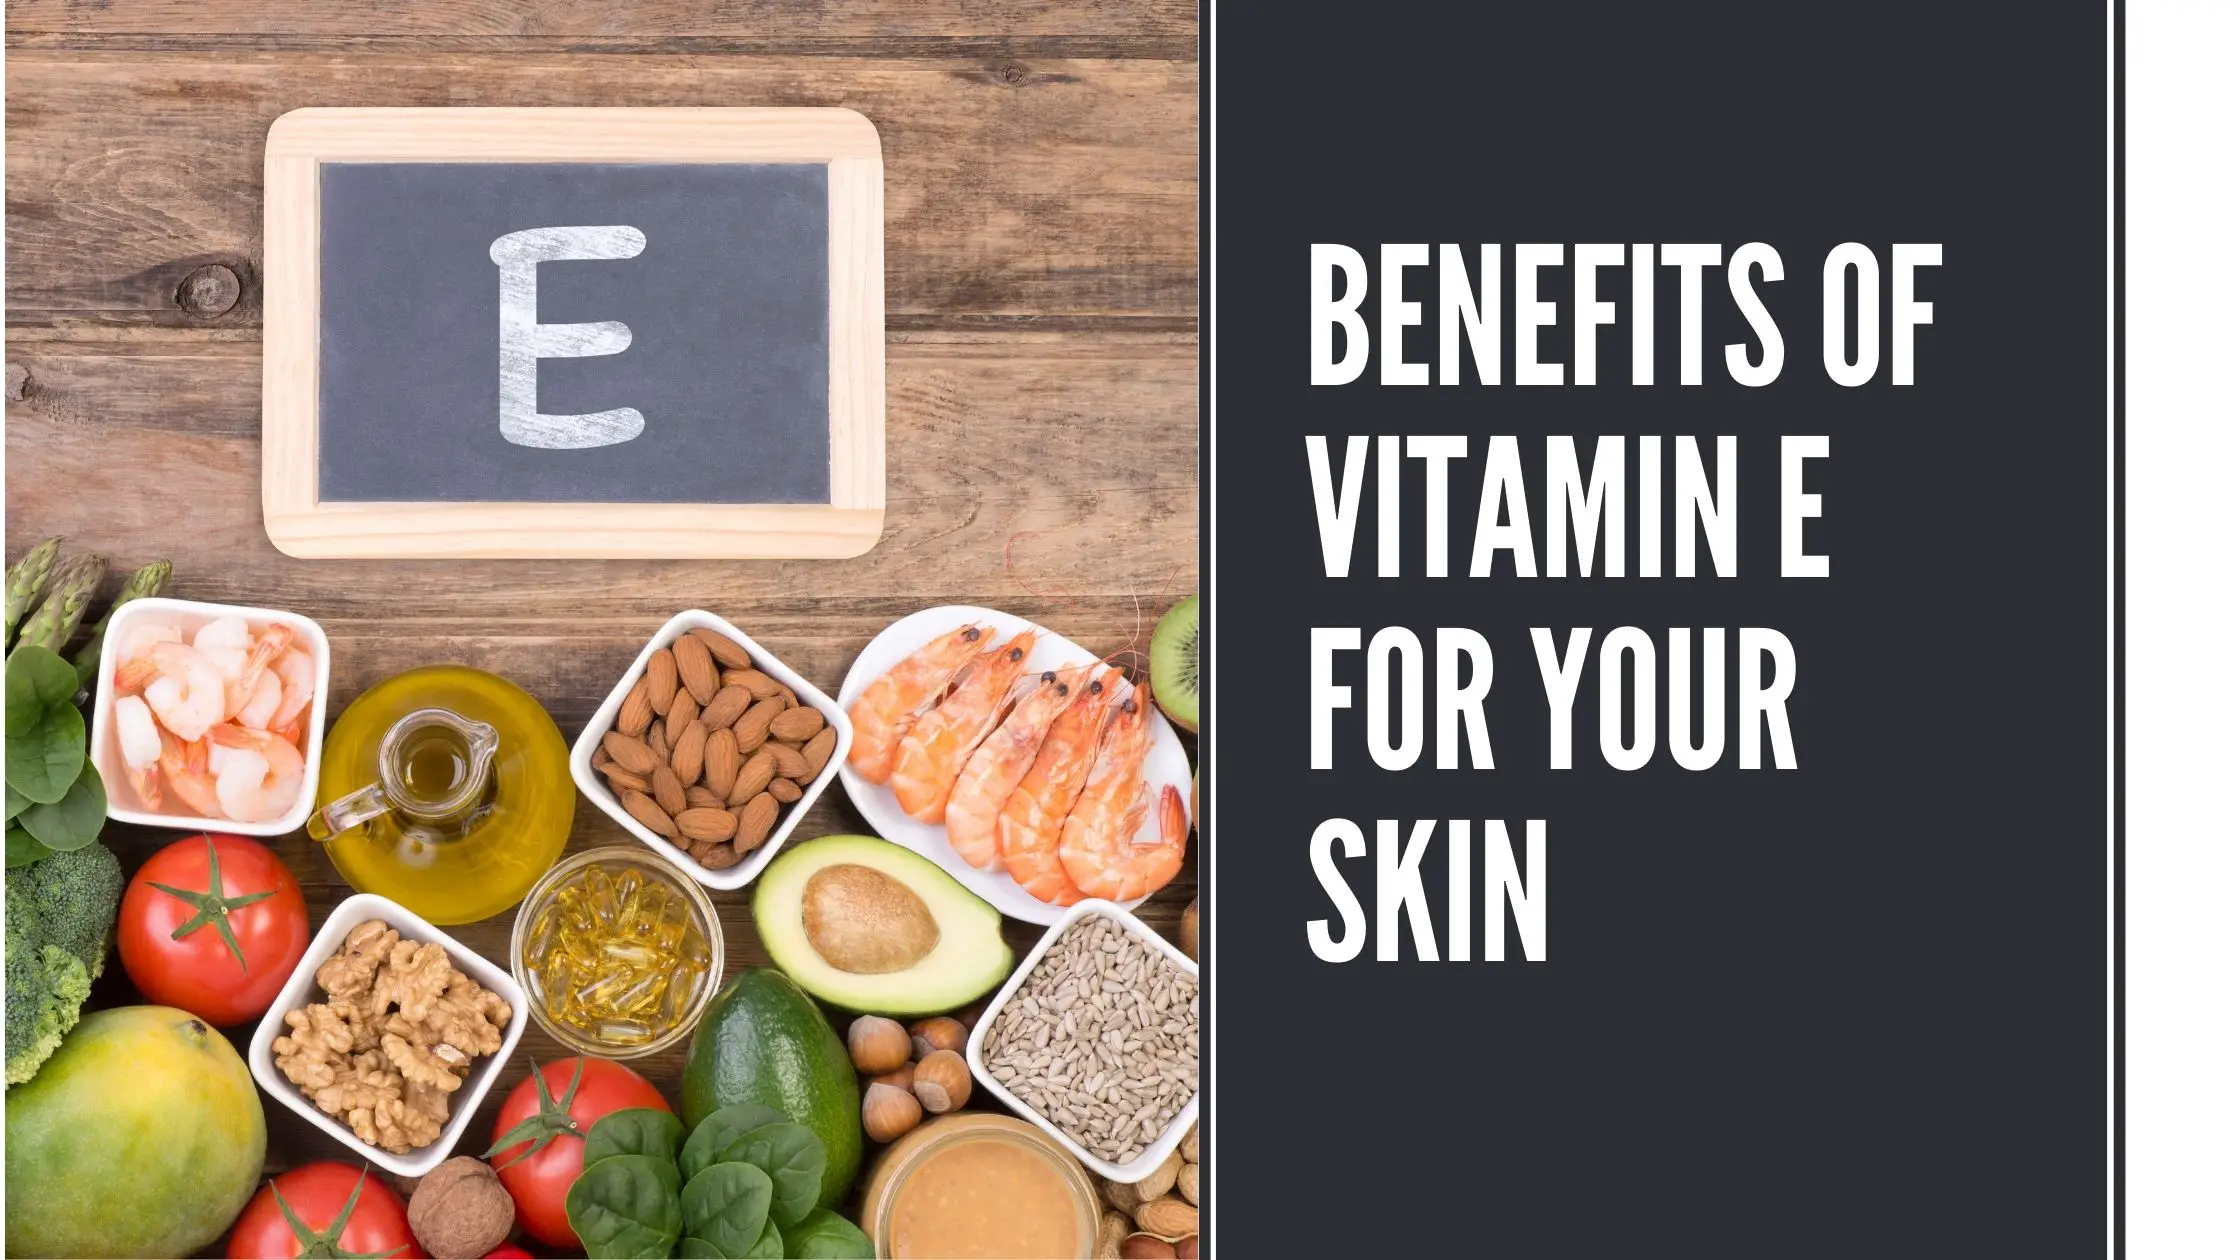 Is Vitamin E good for your skin?